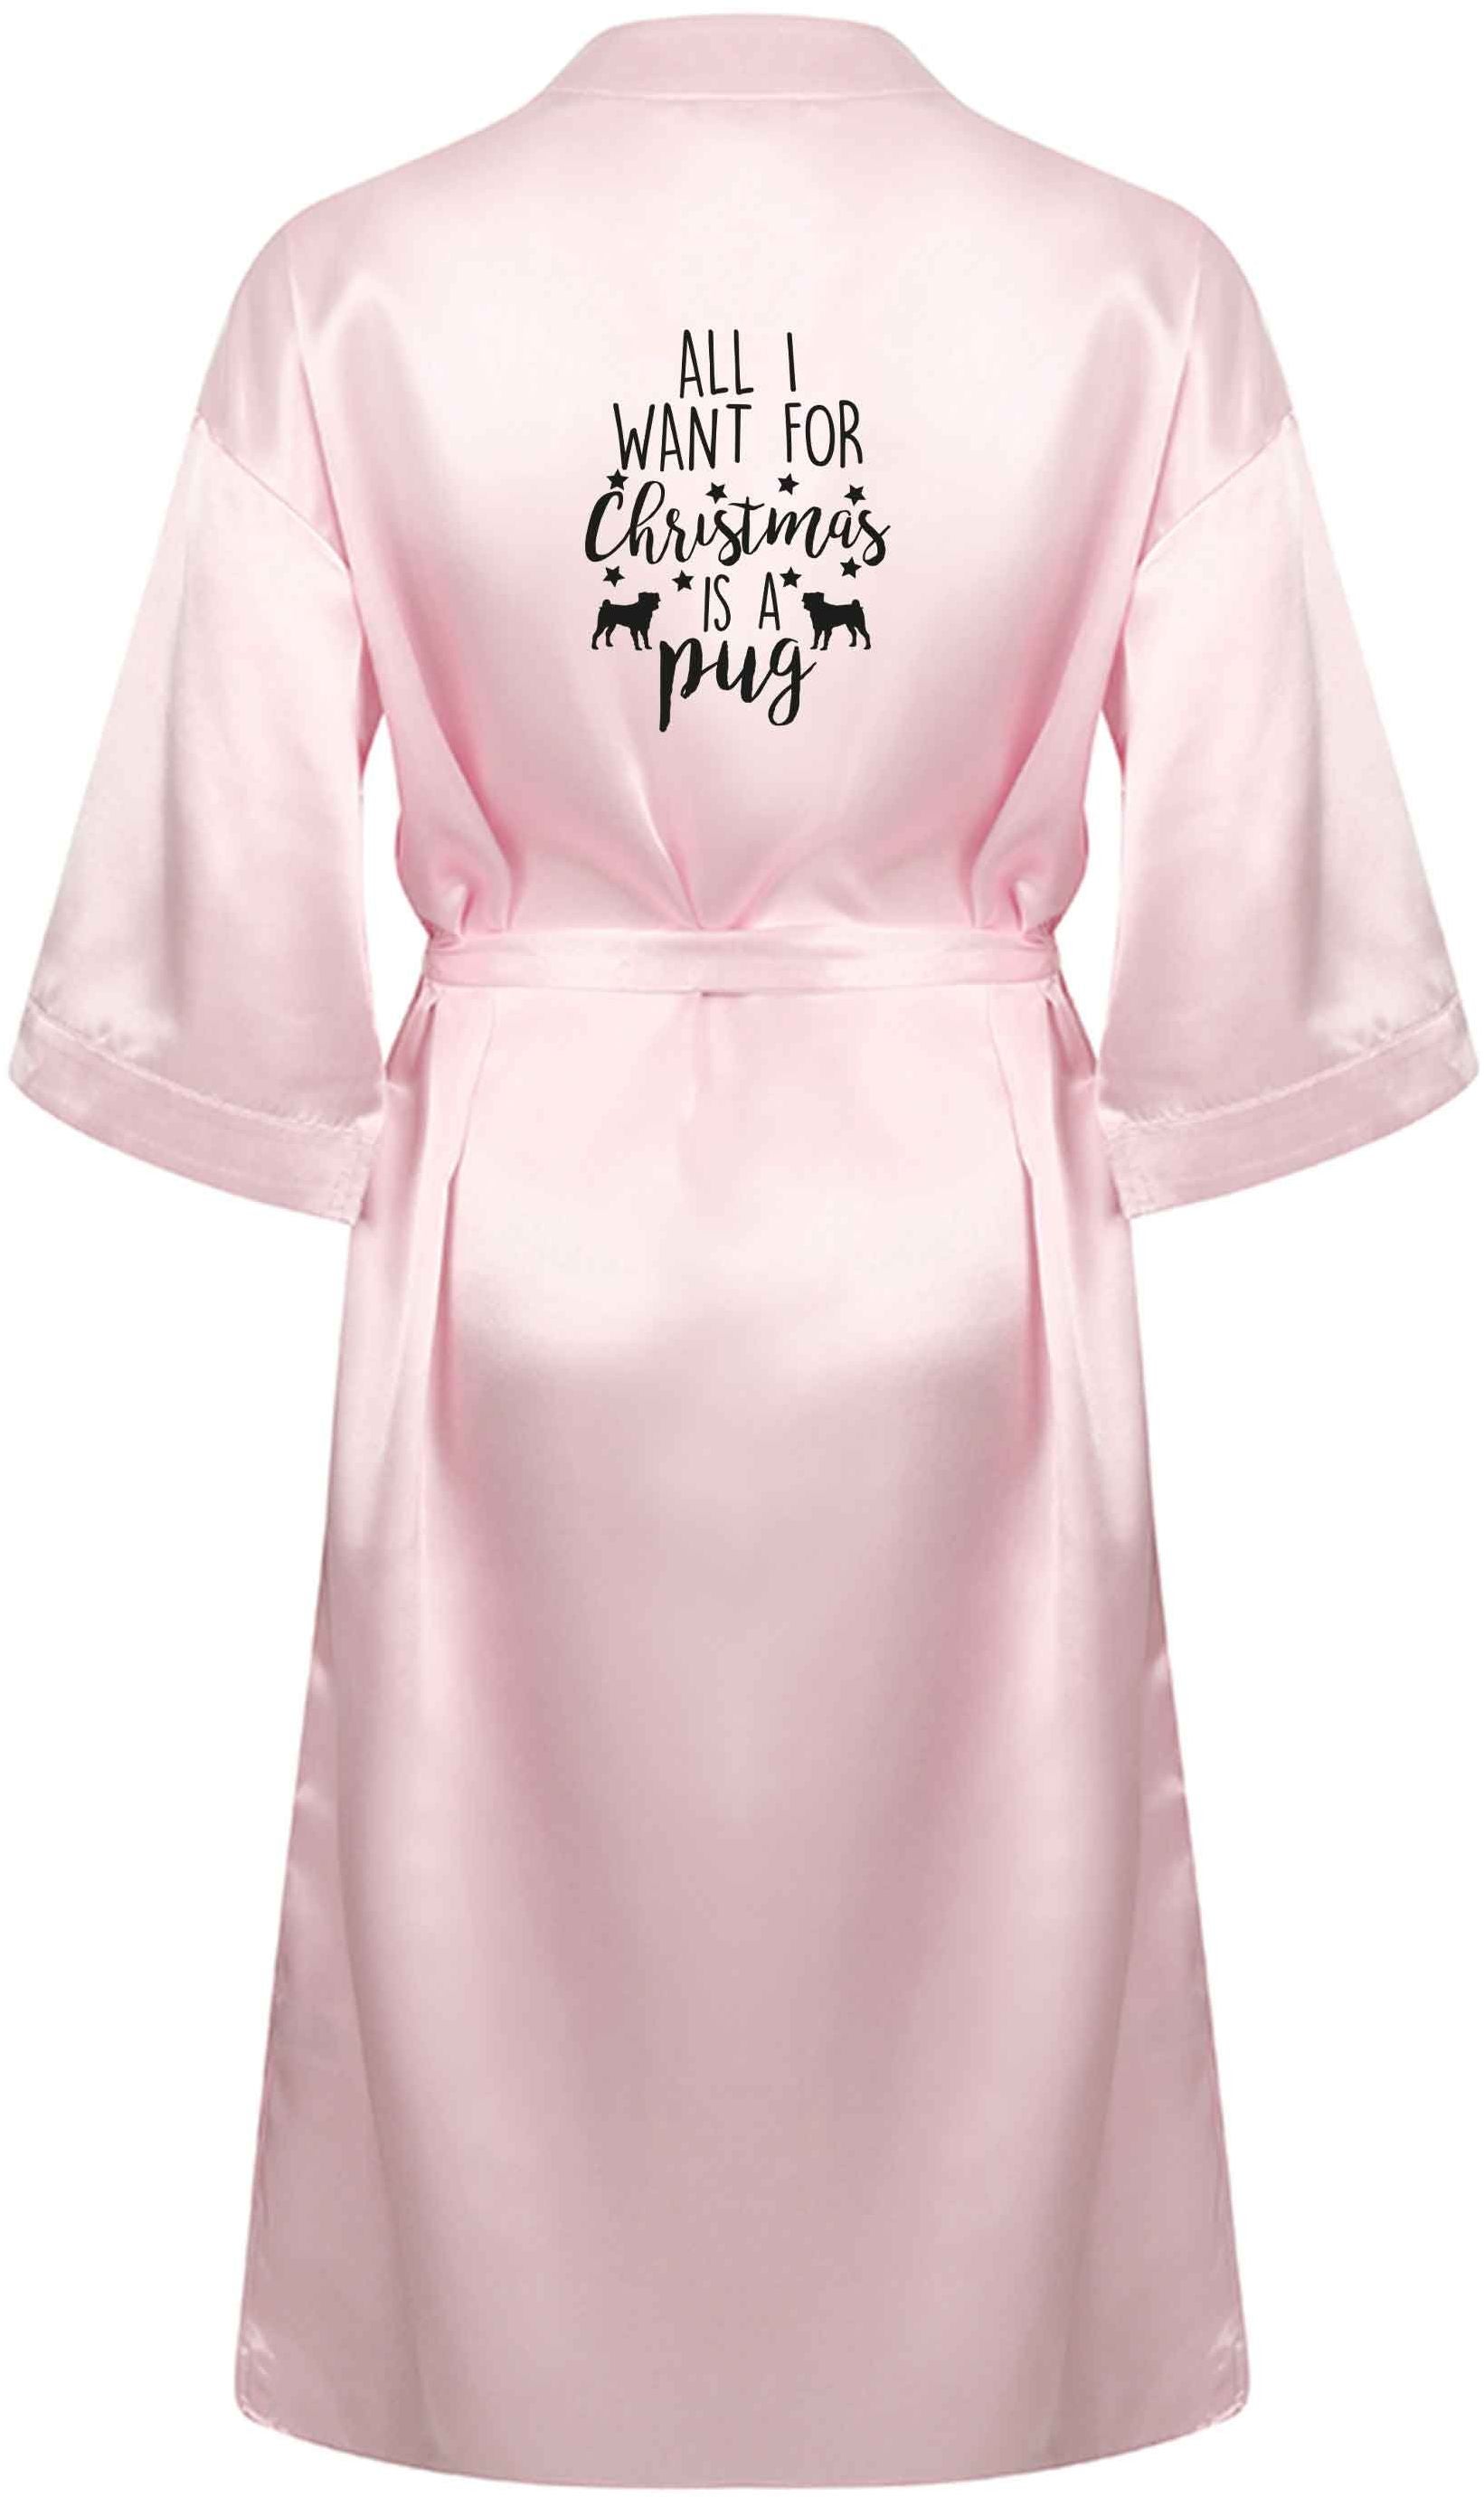 All I want for Christmas is a pug XL/XXL pink ladies dressing gown size 16/18